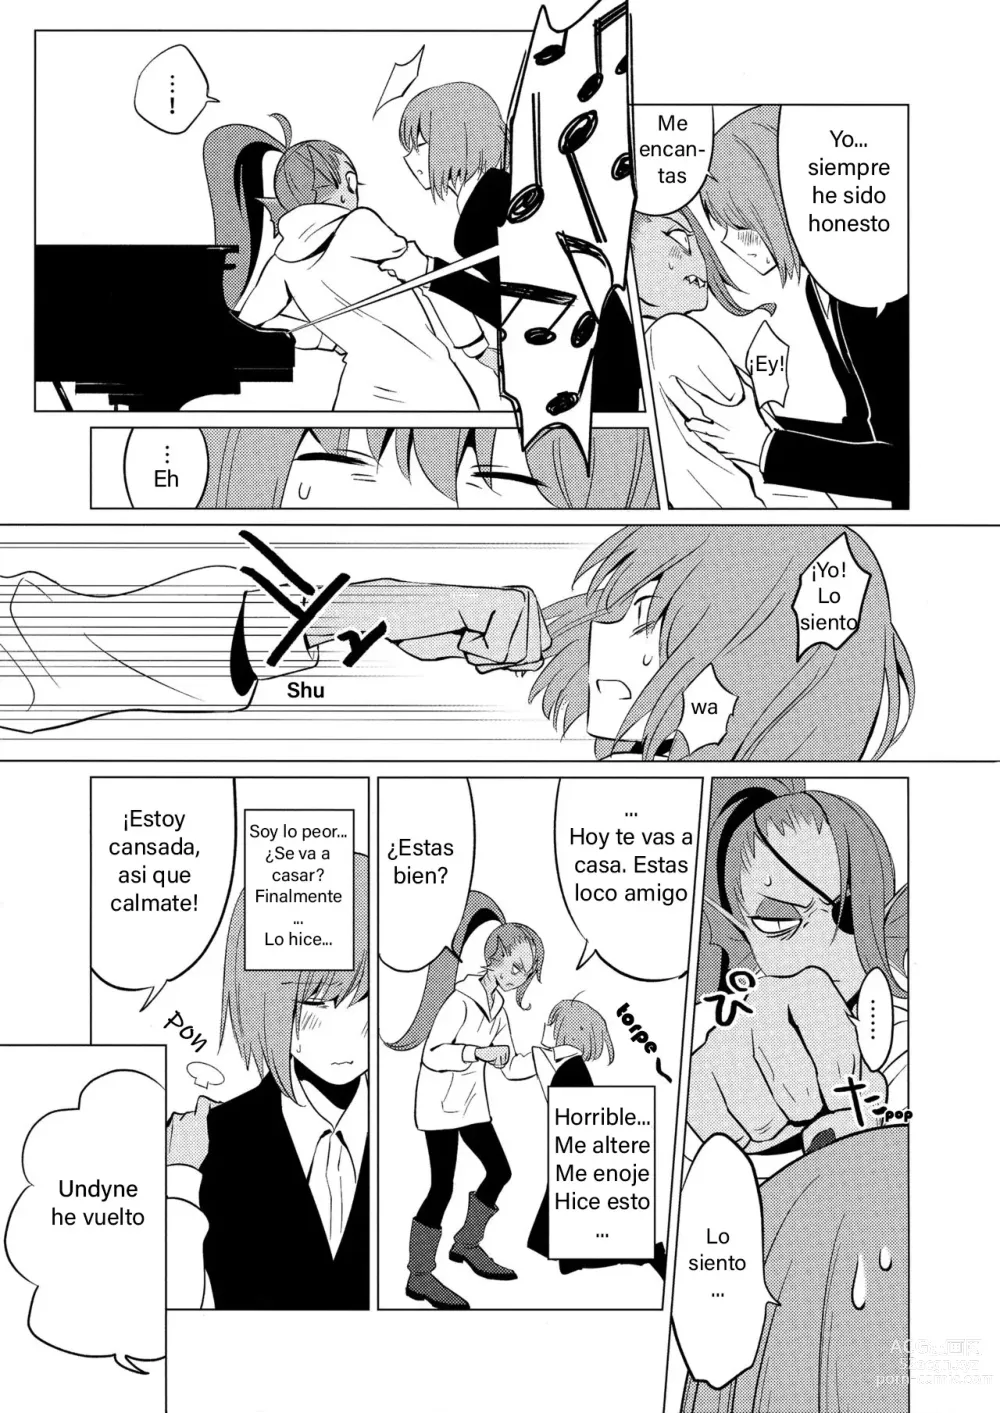 Page 13 of doujinshi CLEARLY